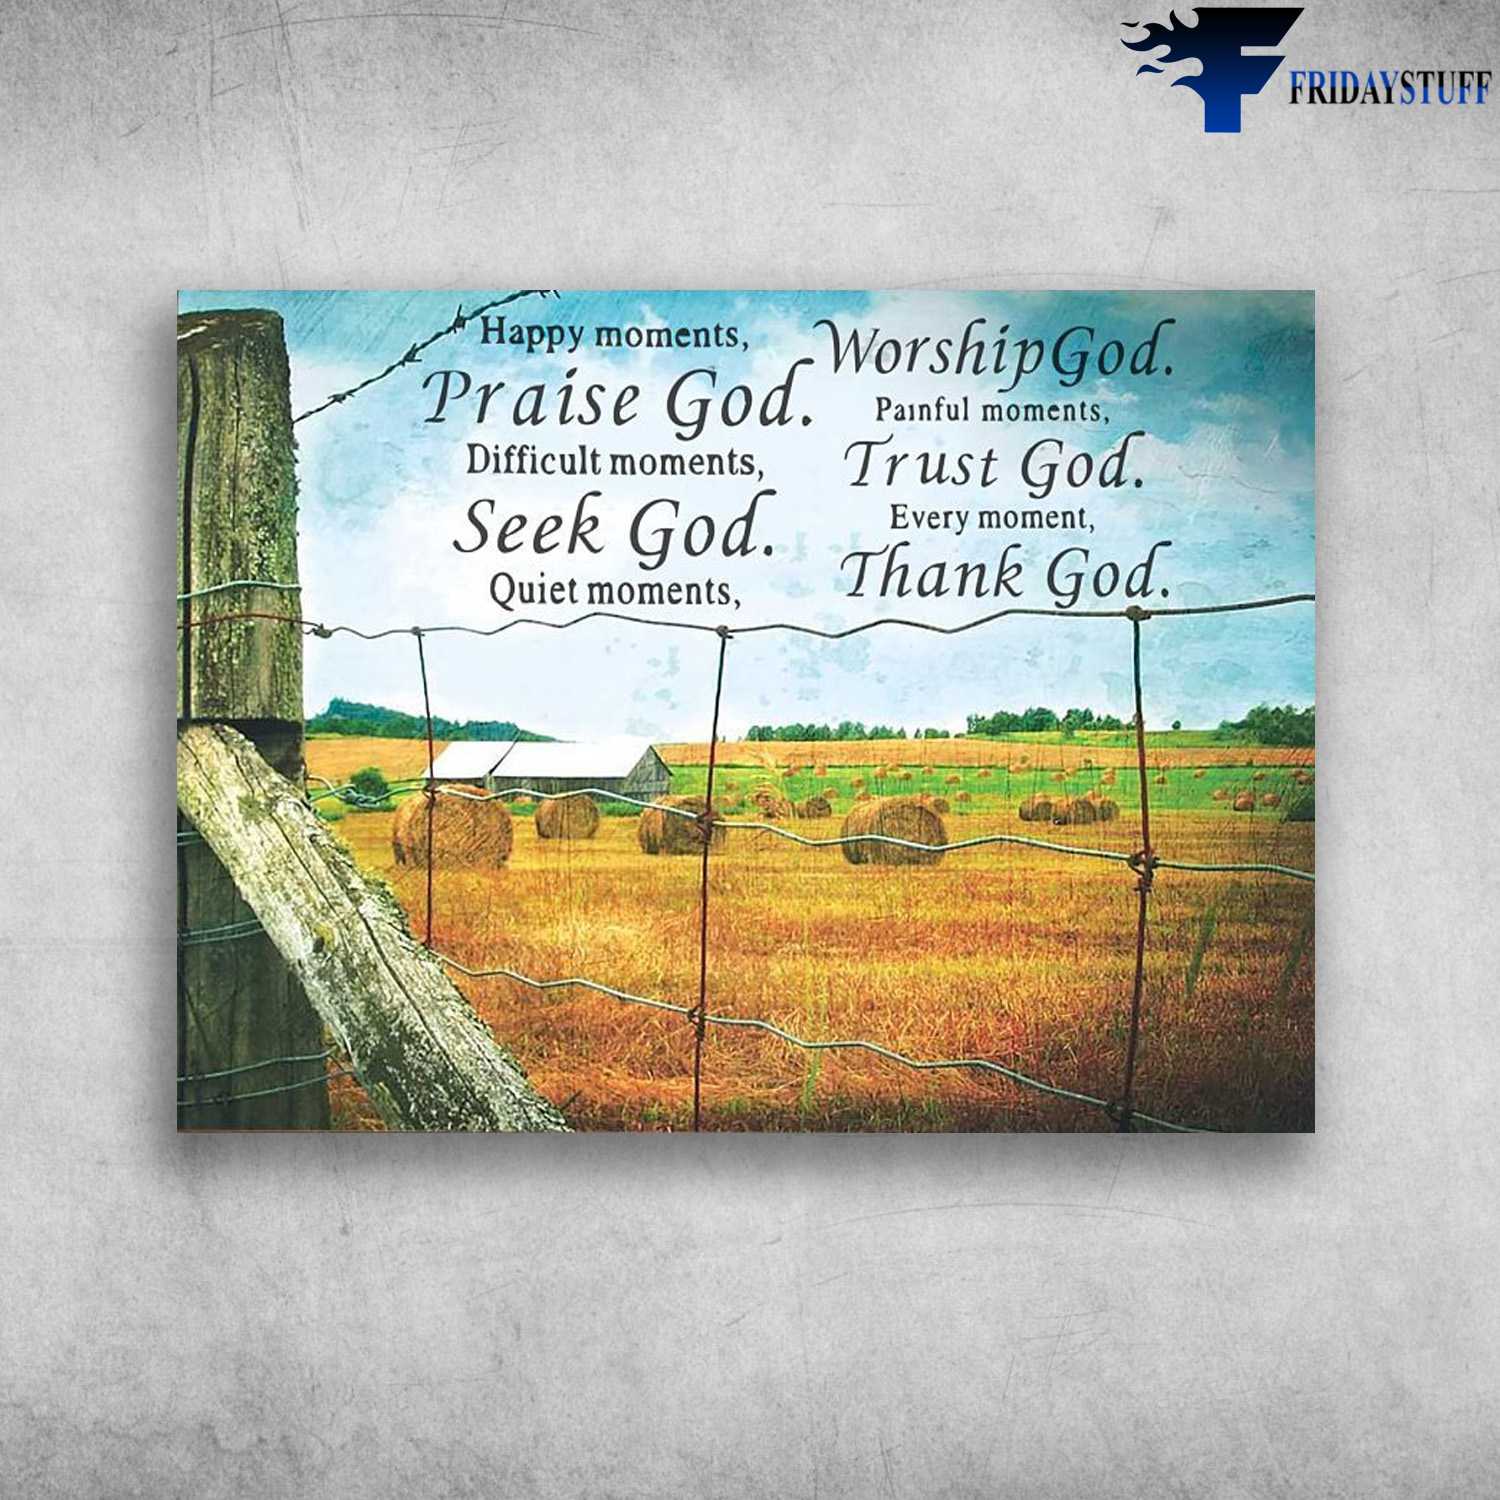 Farmhouse Scenery - Happy Moments, Praise God, Difficult Moments, Seek God, Quiet Moments, Worship God, Painful Moments, Trust God, Every Moment, Thank God